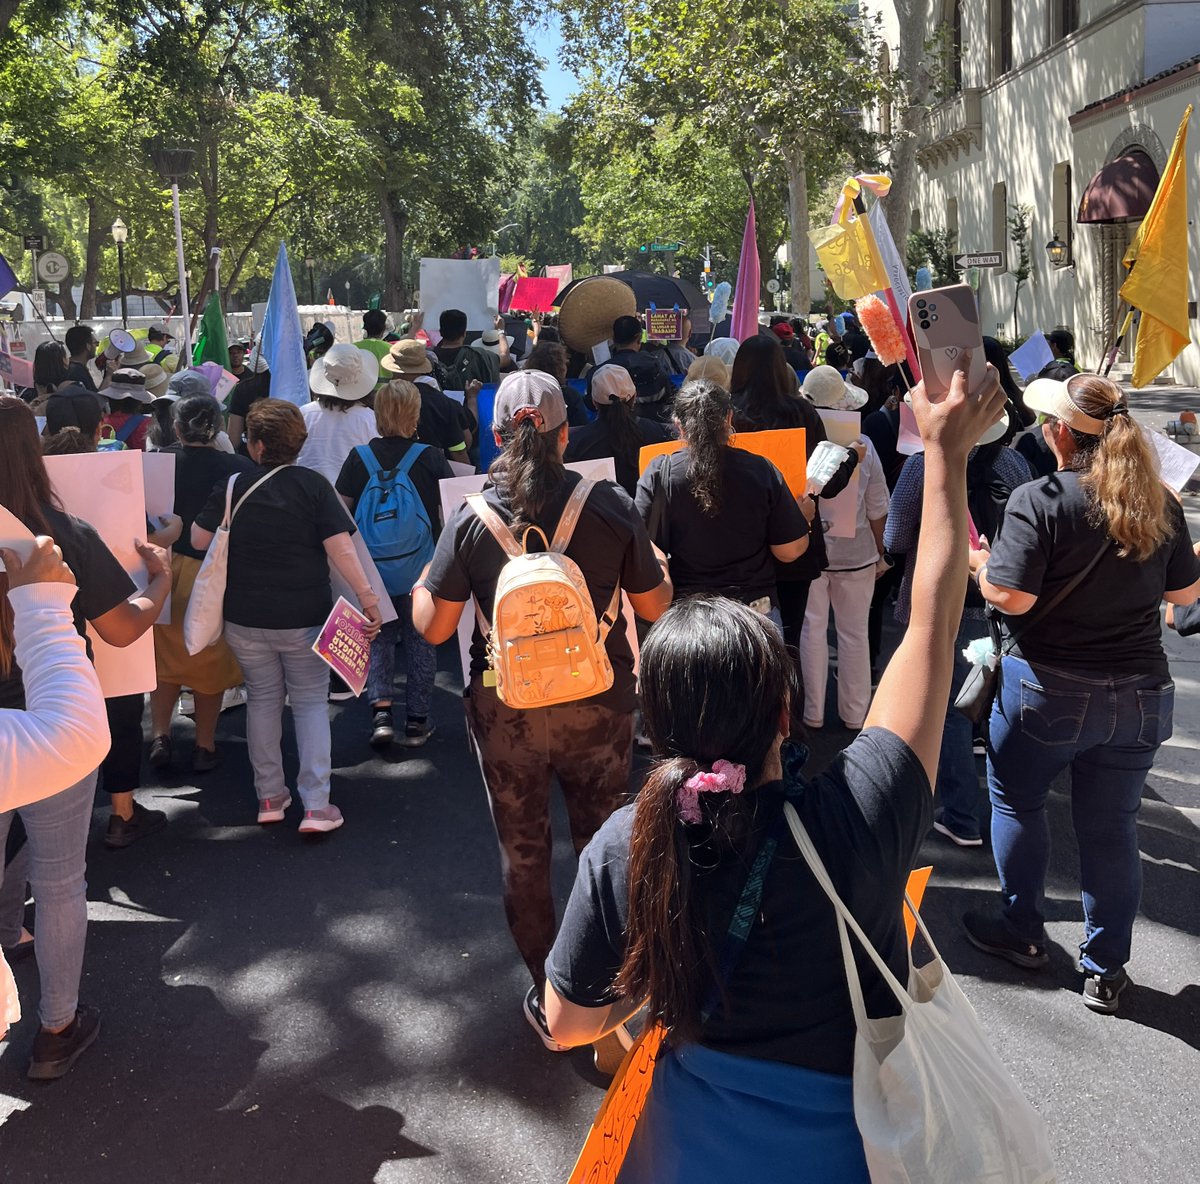 Last month we joined the @CADomesticWrker's Day of Action in Sacramento to raise awareness about SB686 which would remove the exclusion of domestic workers in Cal/OSHA health and safety protections.